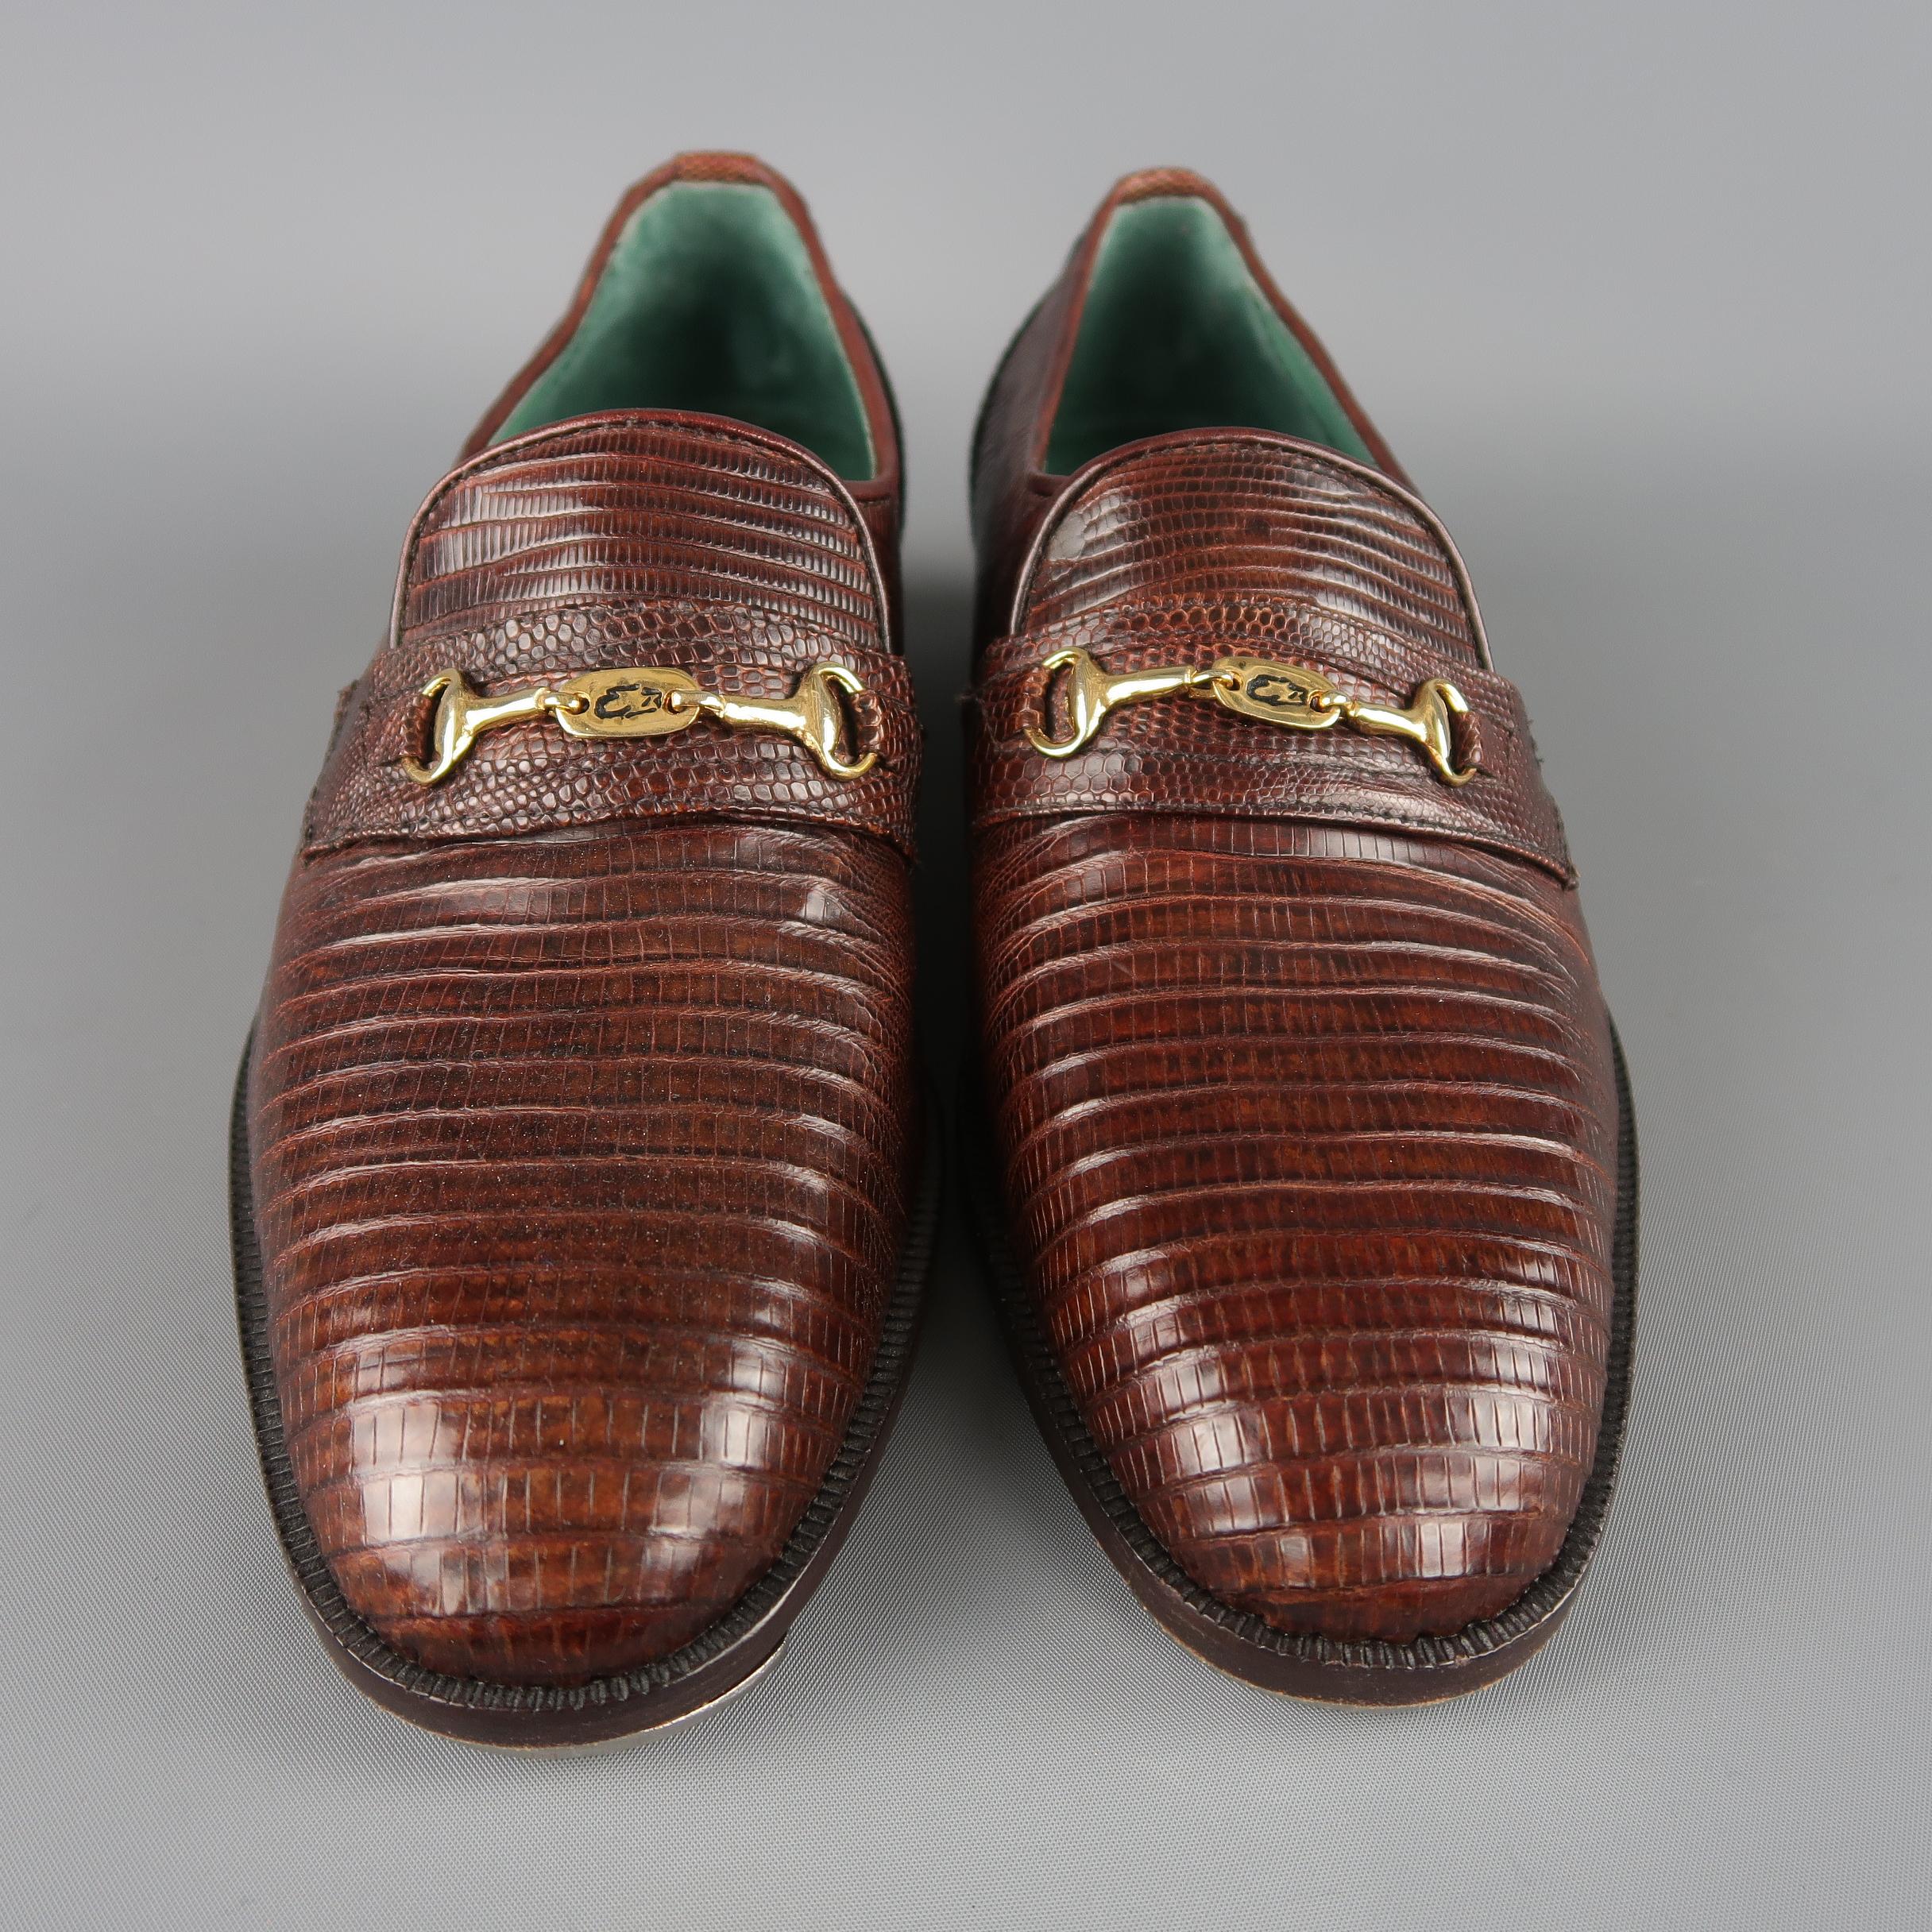 Emilio Parioli Vintage dress loafers come in brown lizard leather with a penny loafer strap adorned with gold tone hardware. Metal plates added. As-is.
 
Brand New.
Marked: UK 7.5